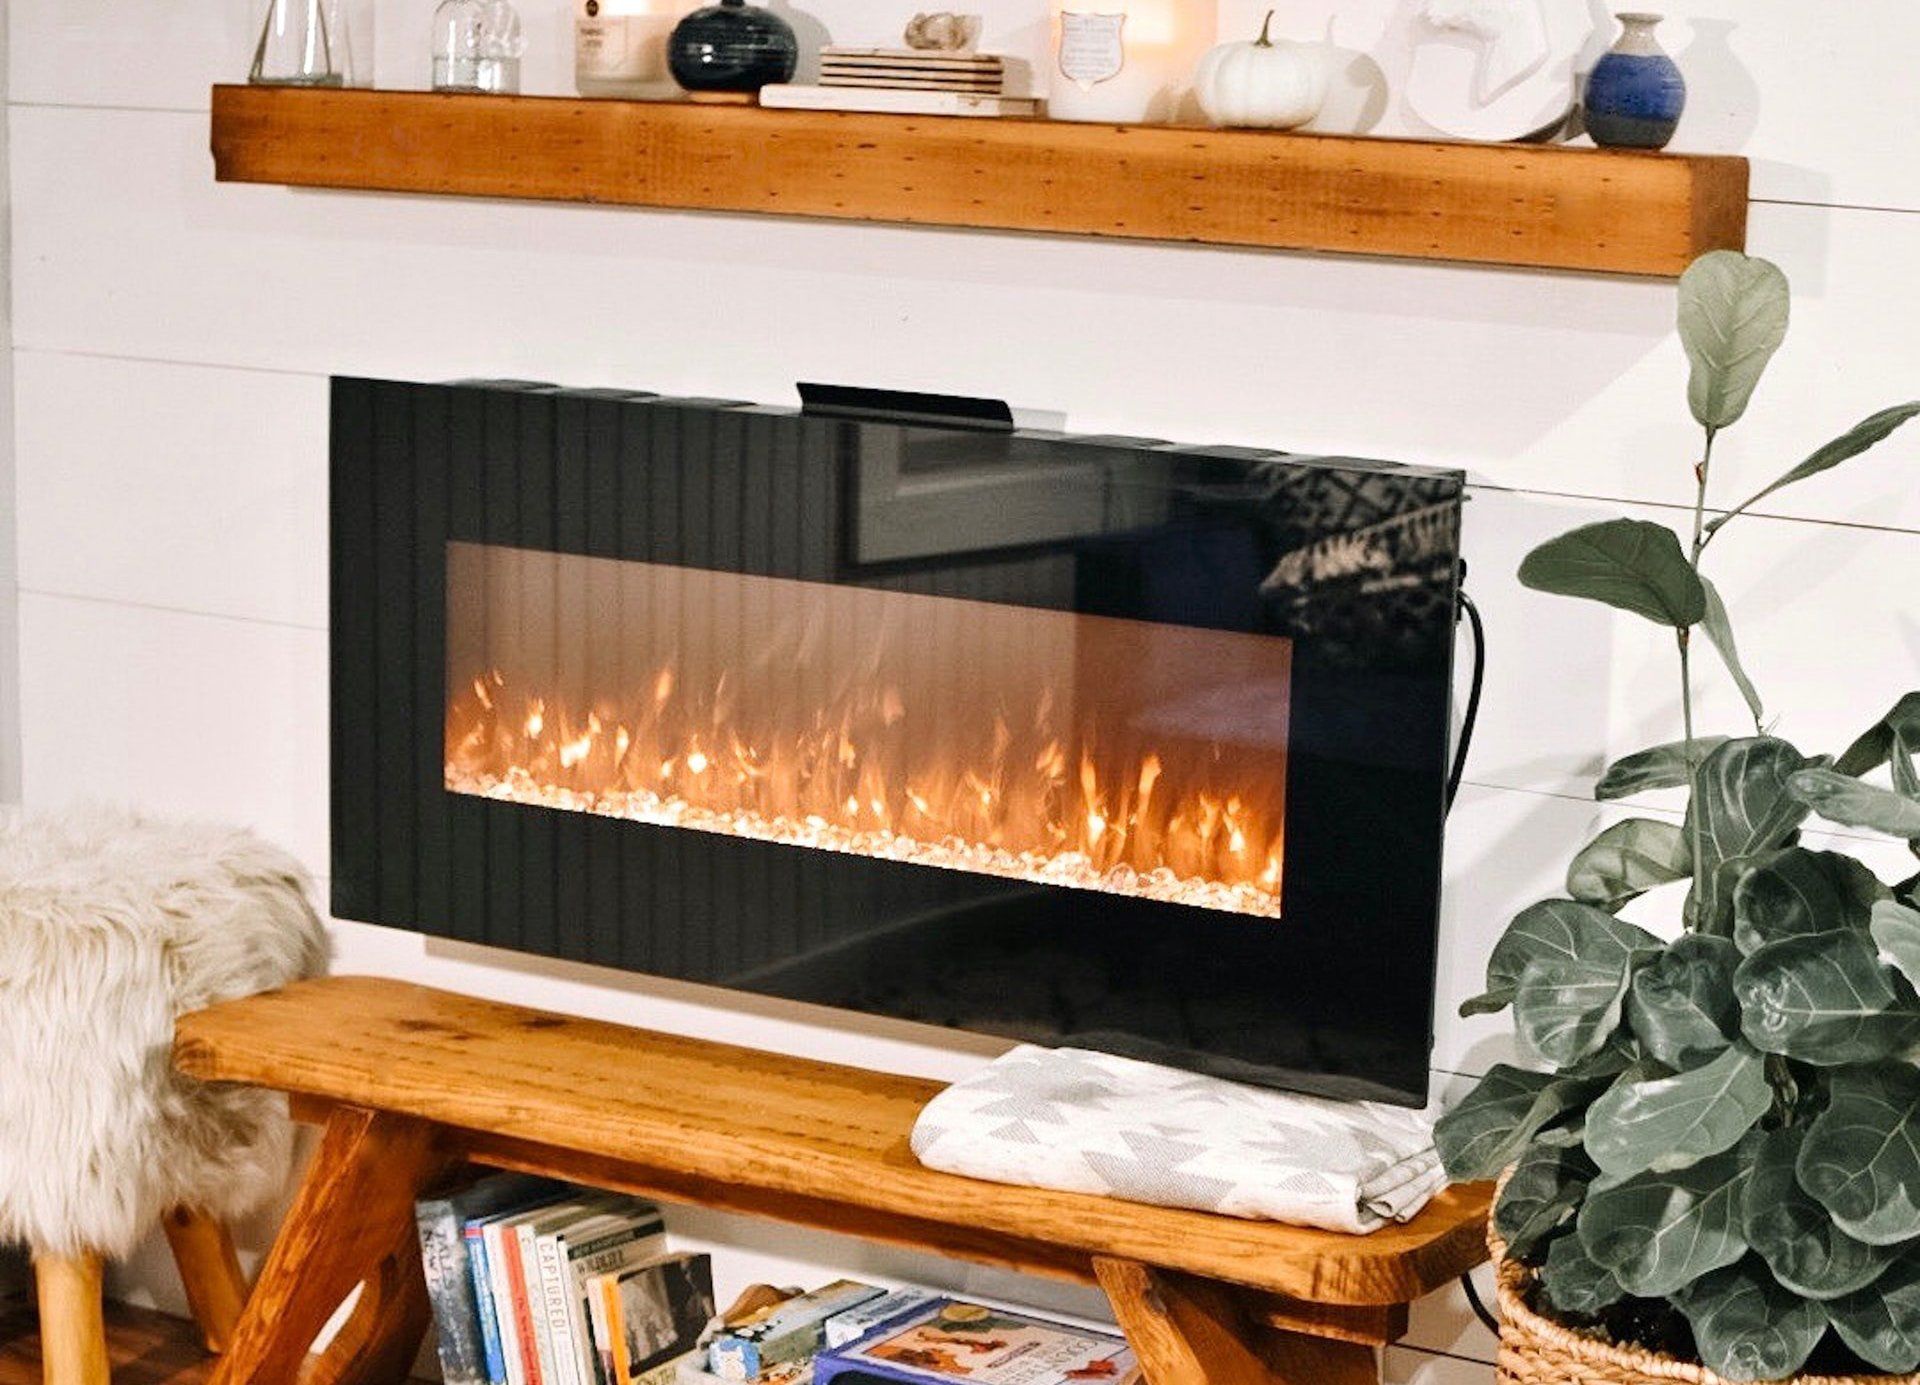 Is a Gas or Wood Fireplace More Expensive?